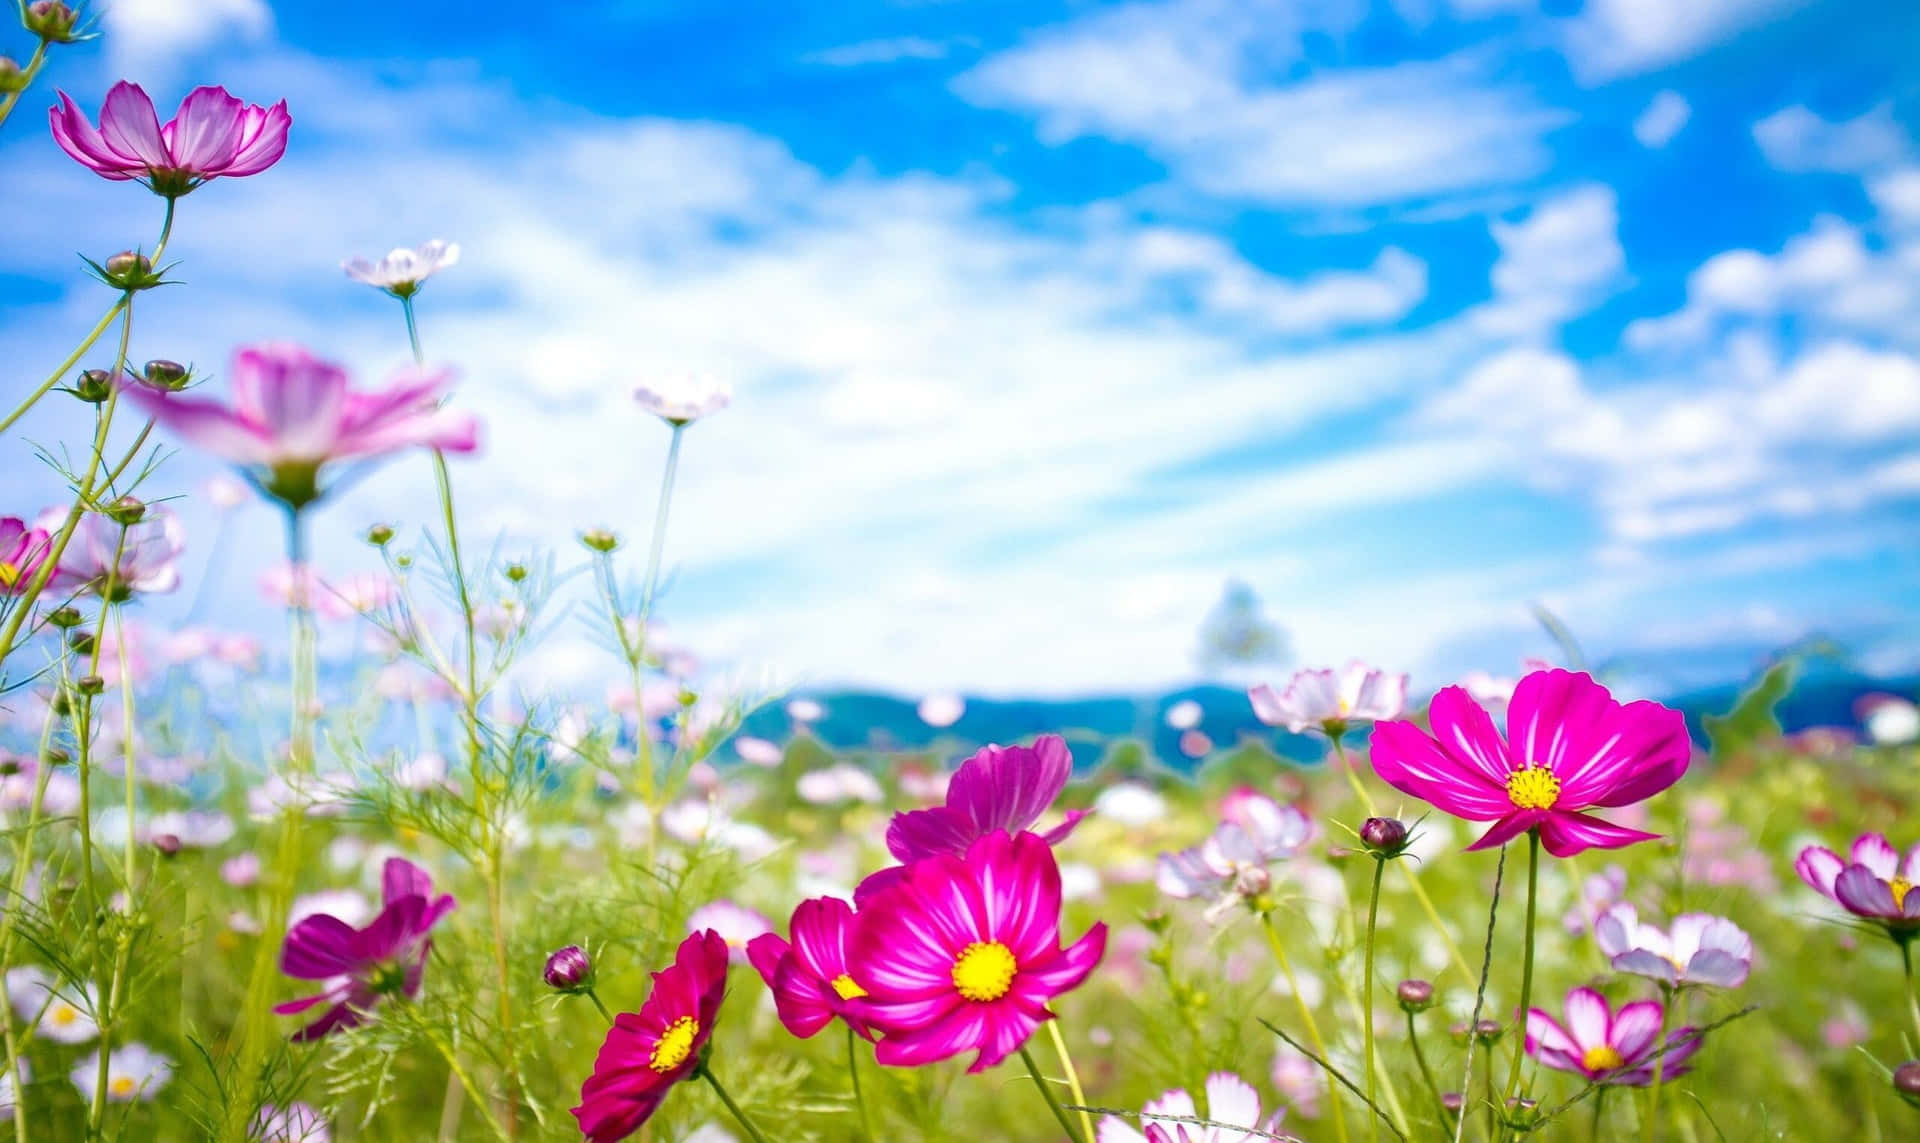 Brighten Up Your Day with a Flower Desktop Background